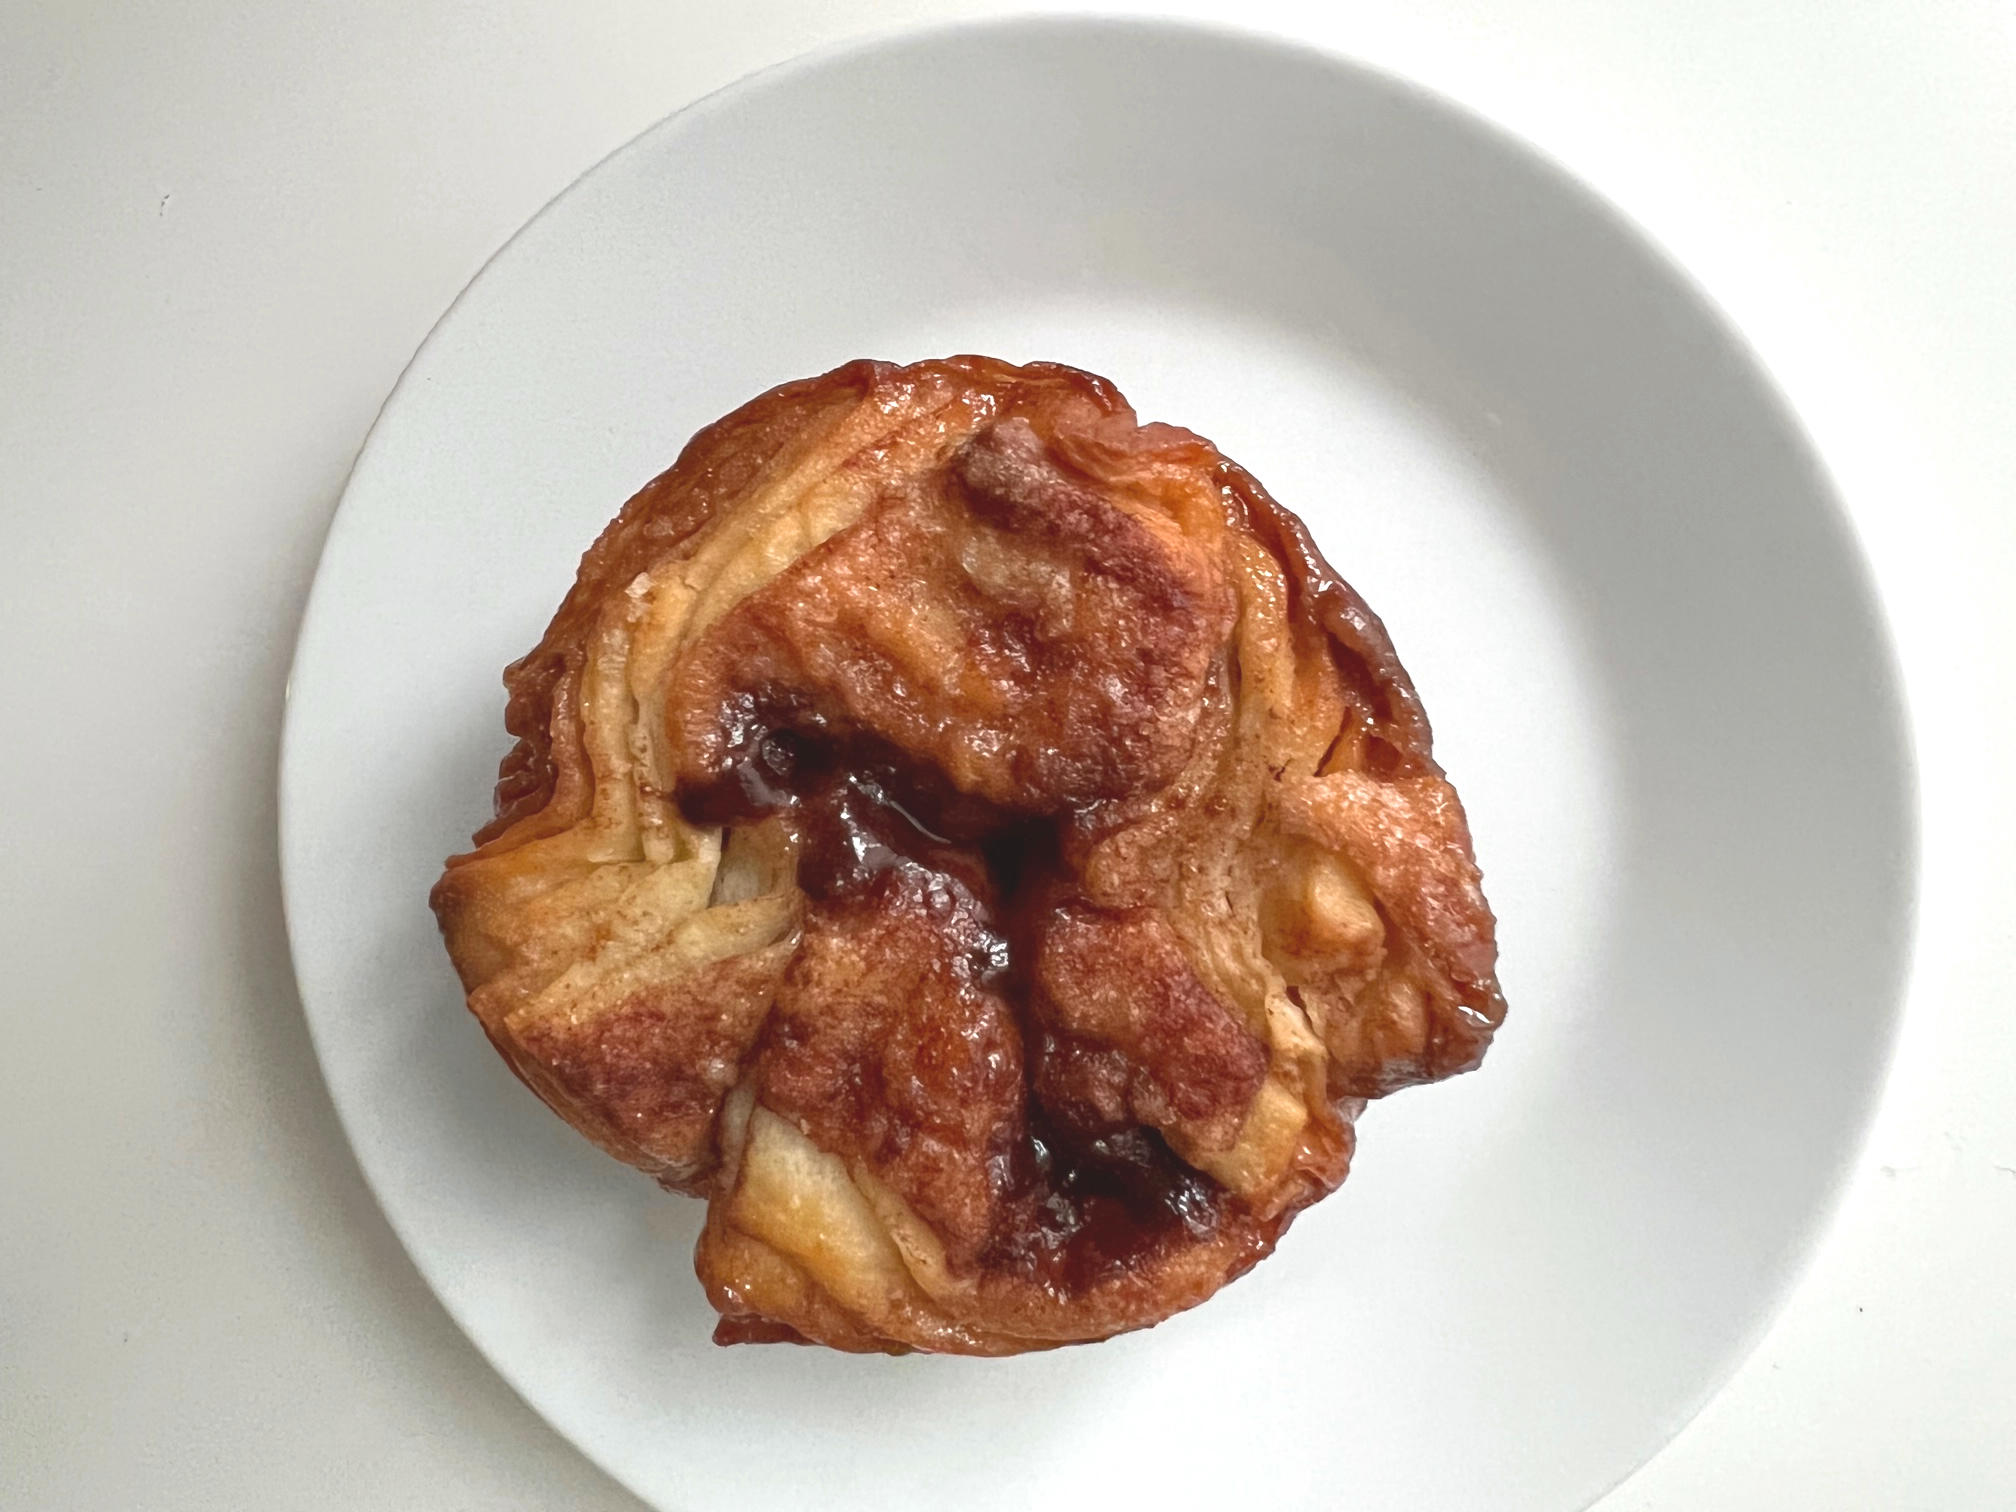 On a white plate on a white table, there is a koiugn amann from Six Red Chairs Bakery. Photo by Alyssa Buckley.